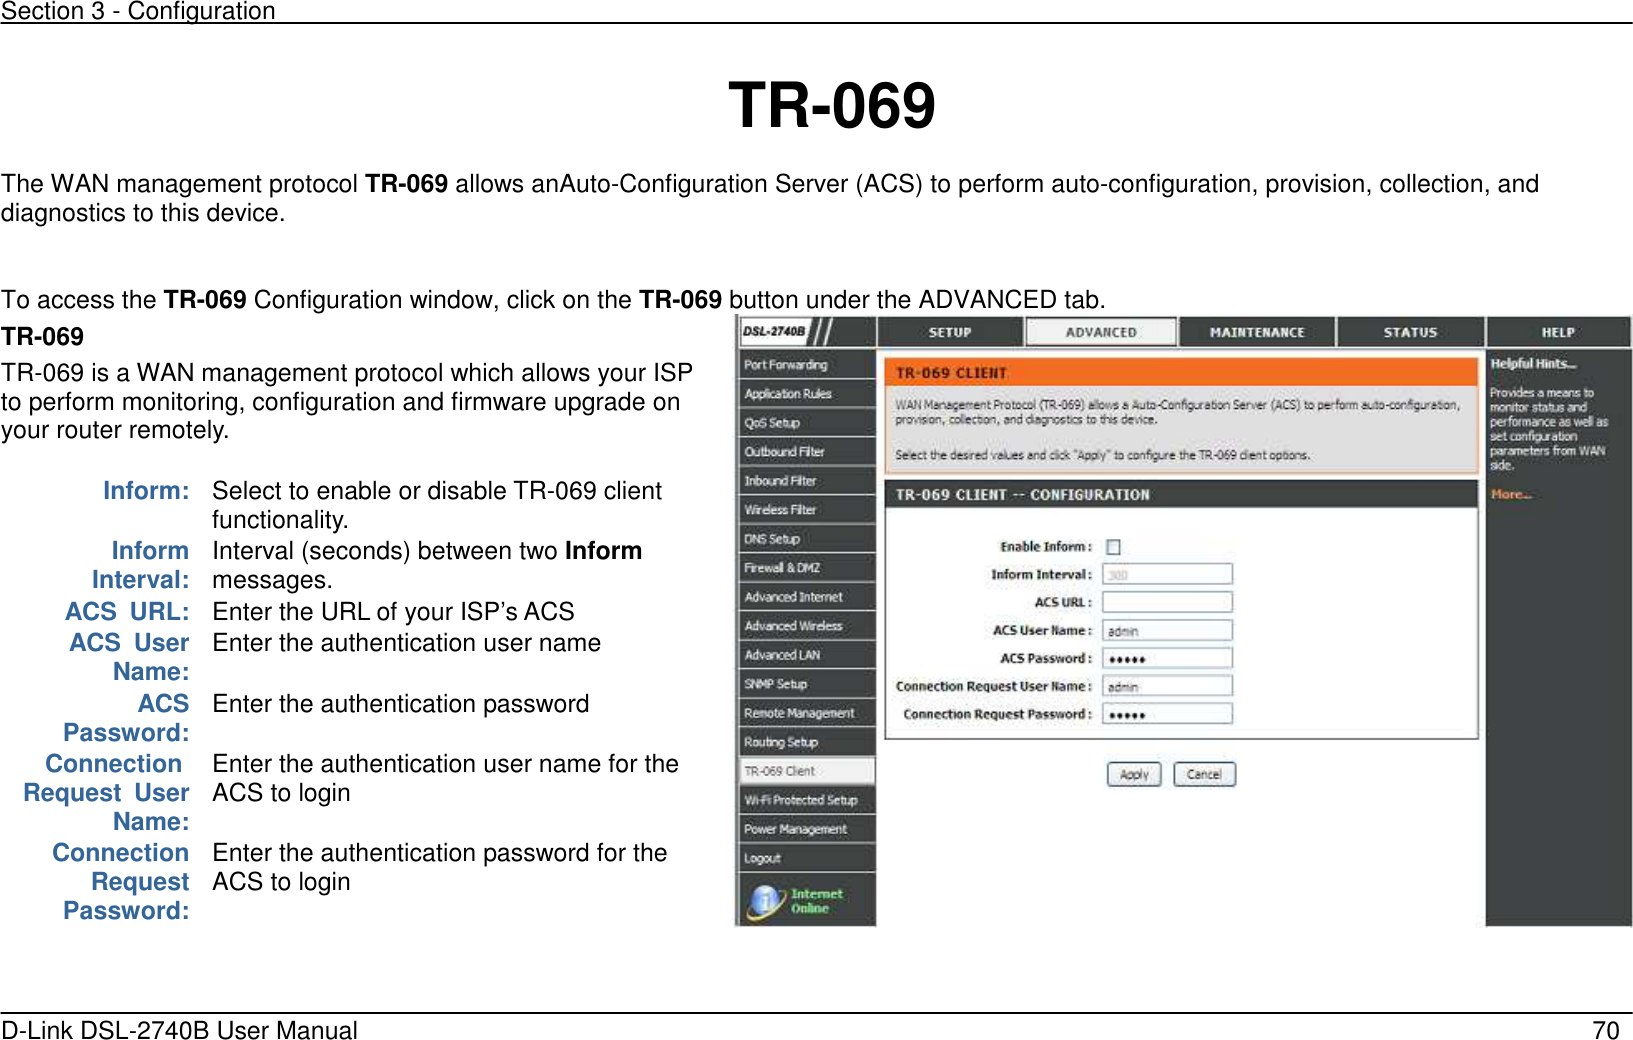 Section 3 - Configuration   D-Link DSL-2740B User Manual                                                  70     TR-069 The WAN management protocol TR-069 allows anAuto-Configuration Server (ACS) to perform auto-configuration, provision, collection, and diagnostics to this device.    To access the TR-069 Configuration window, click on the TR-069 button under the ADVANCED tab. TR-069   TR-069 is a WAN management protocol which allows your ISP to perform monitoring, configuration and firmware upgrade on your router remotely.    Inform: Select to enable or disable TR-069 client functionality.        Inform        Interval: Interval (seconds) between two Inform messages. ACS  URL: Enter the URL of your ISP’s ACS         ACS  User  Name: Enter the authentication user name            ACS Password: Enter the authentication password     Connection Request  User  Name: Enter the authentication user name for the   ACS to login Connection Request Password: Enter the authentication password for the   ACS to login    